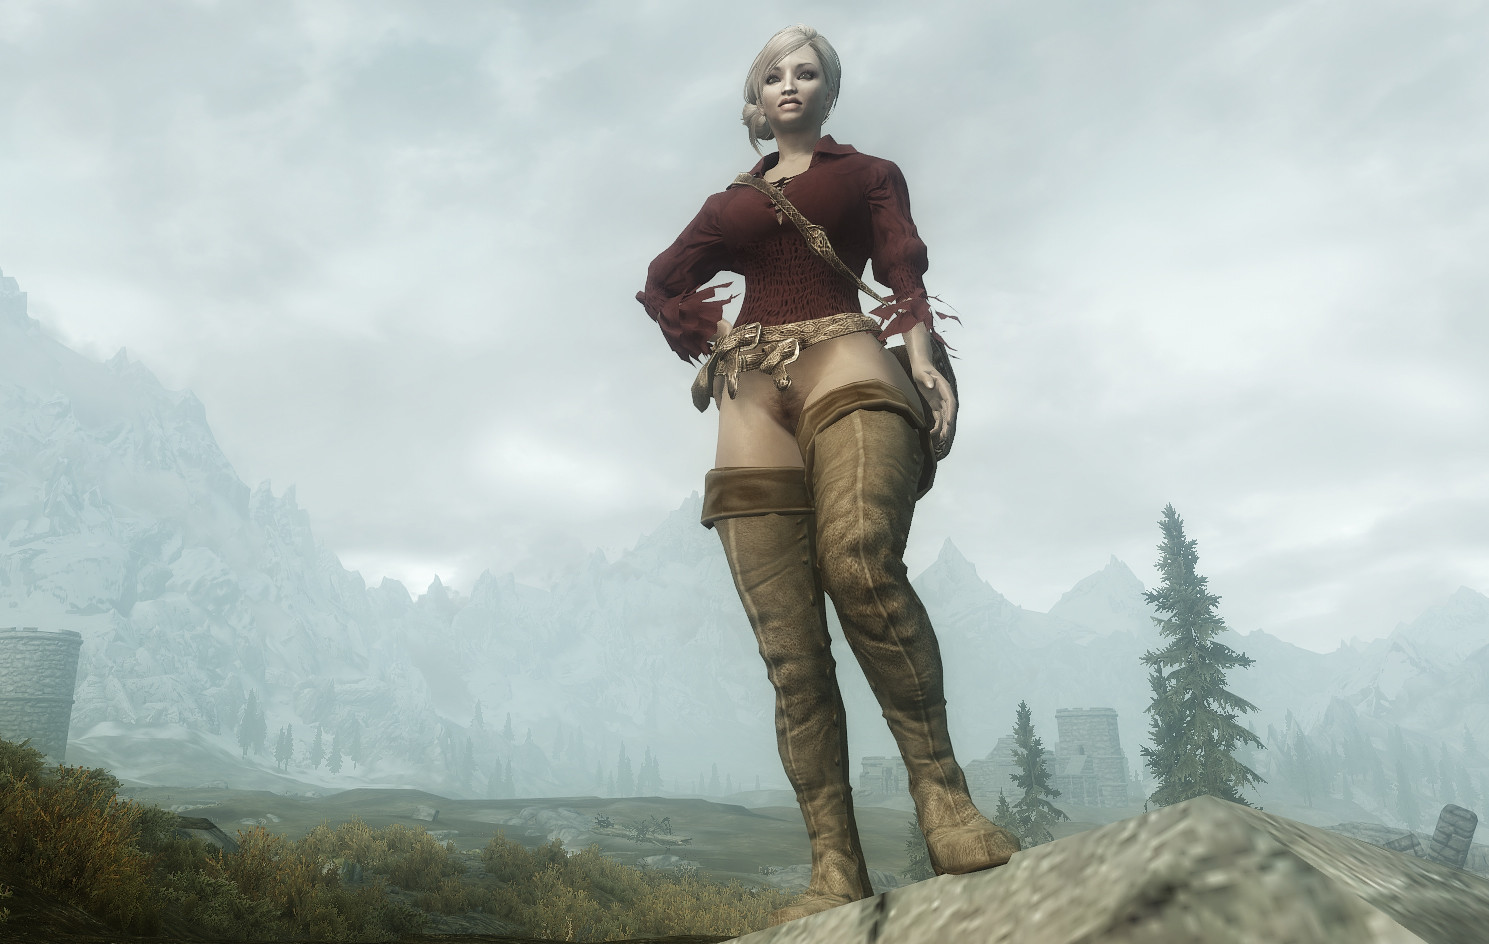 Sexy Adventurer's Outfit